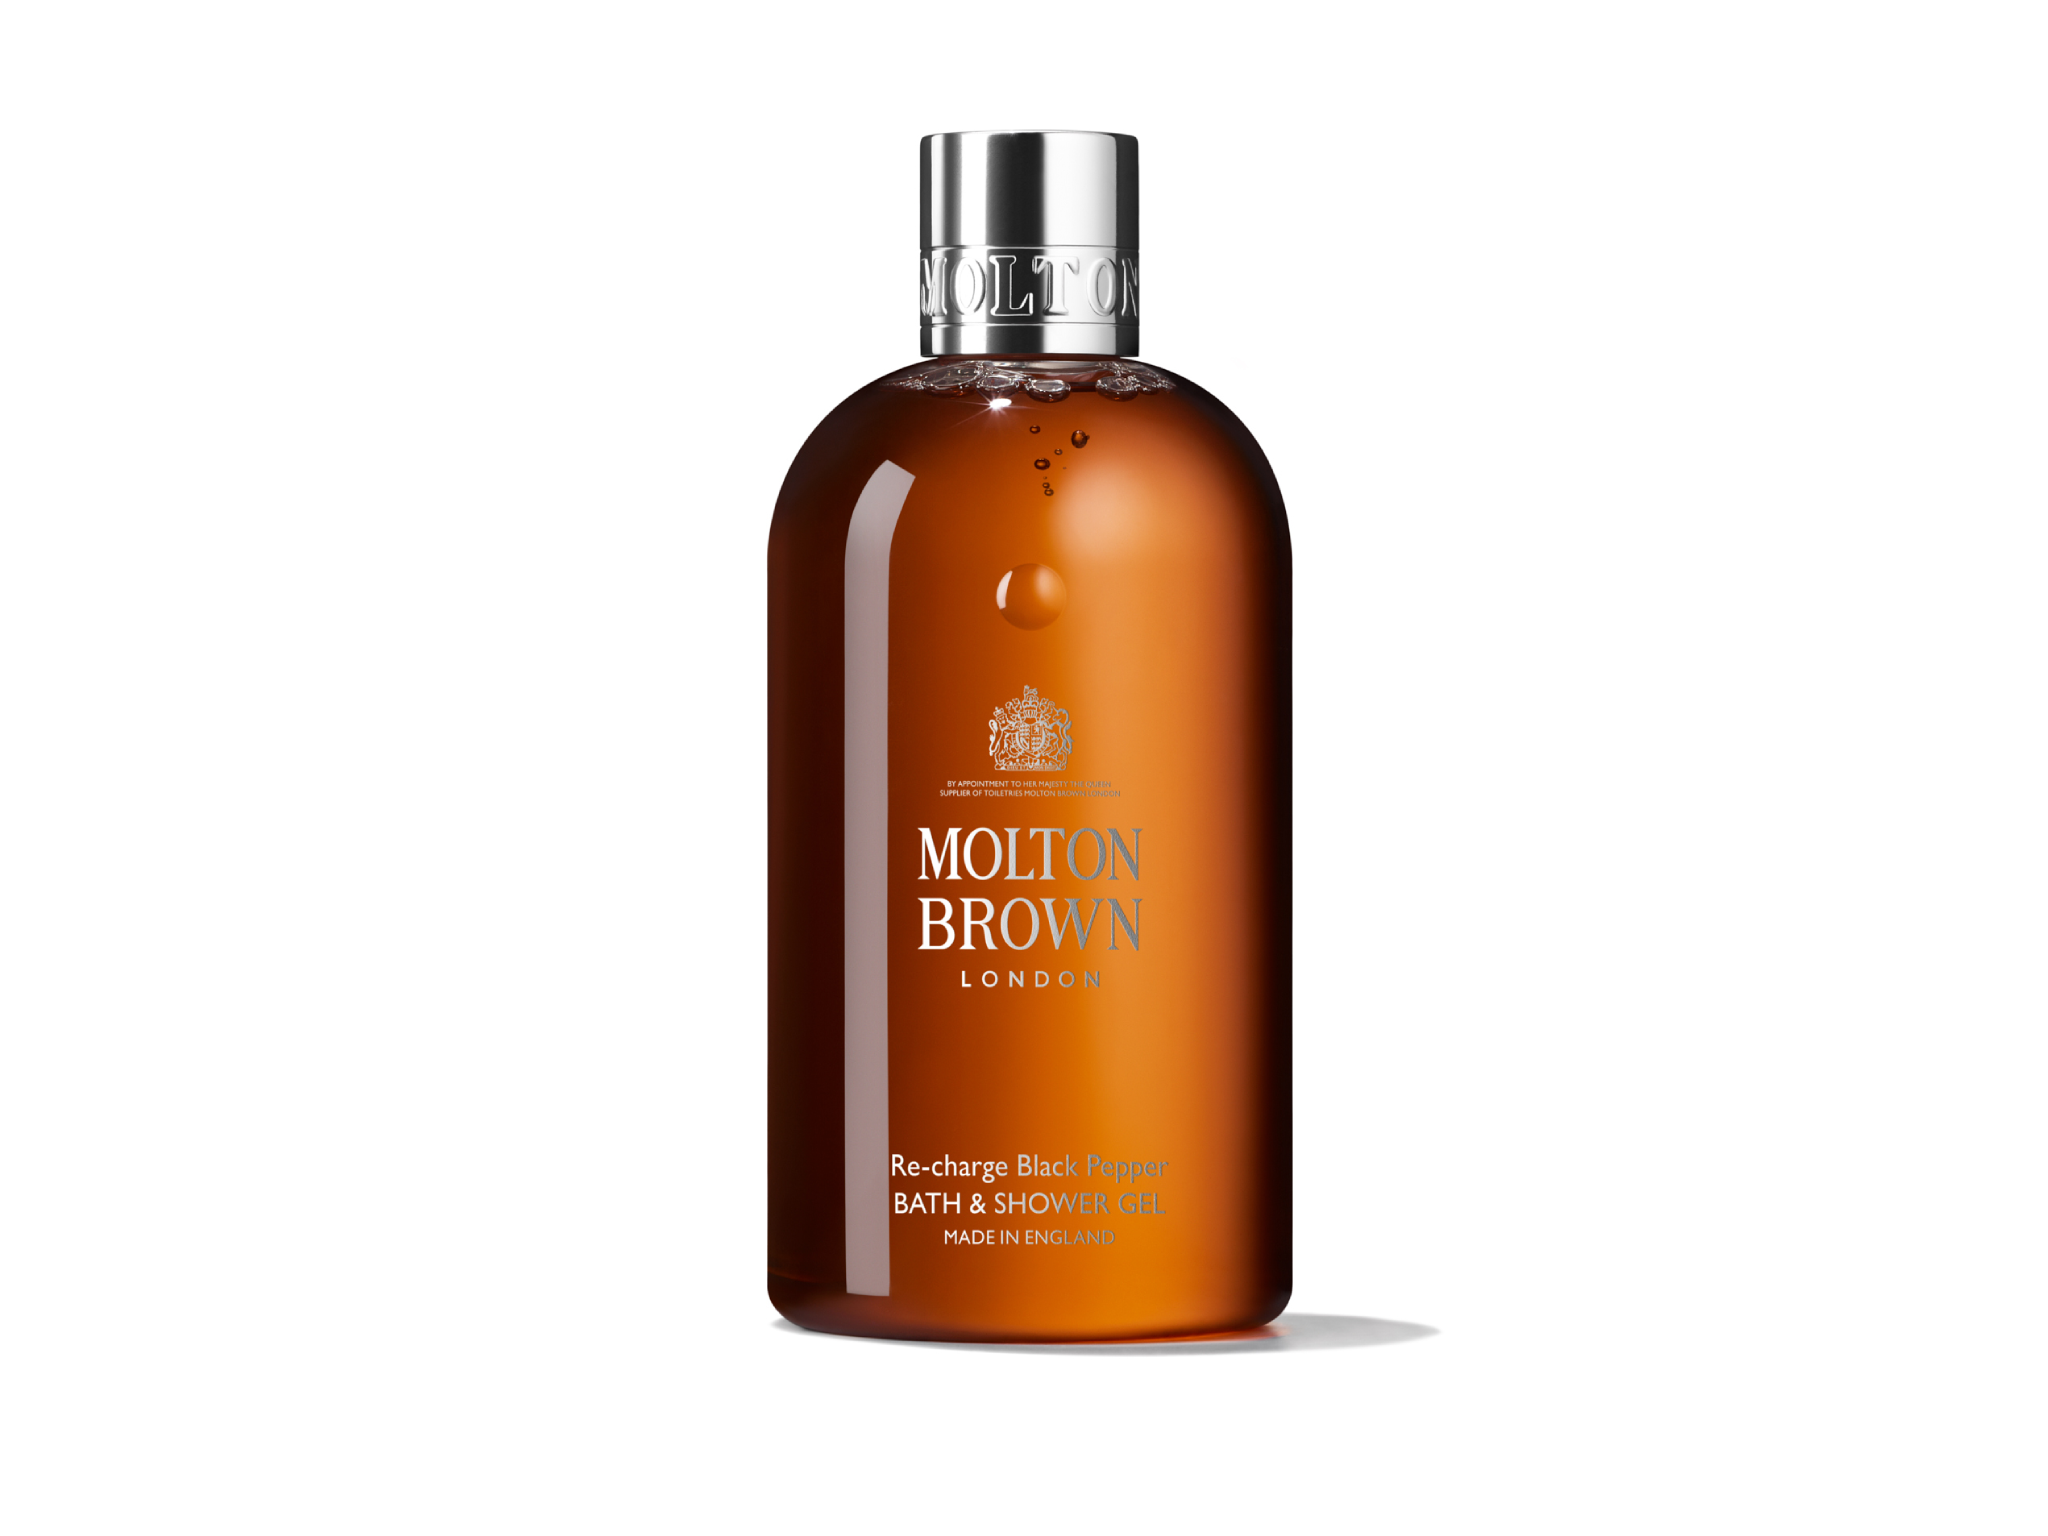 Molton Brown recharge black pepper bath and shower gel